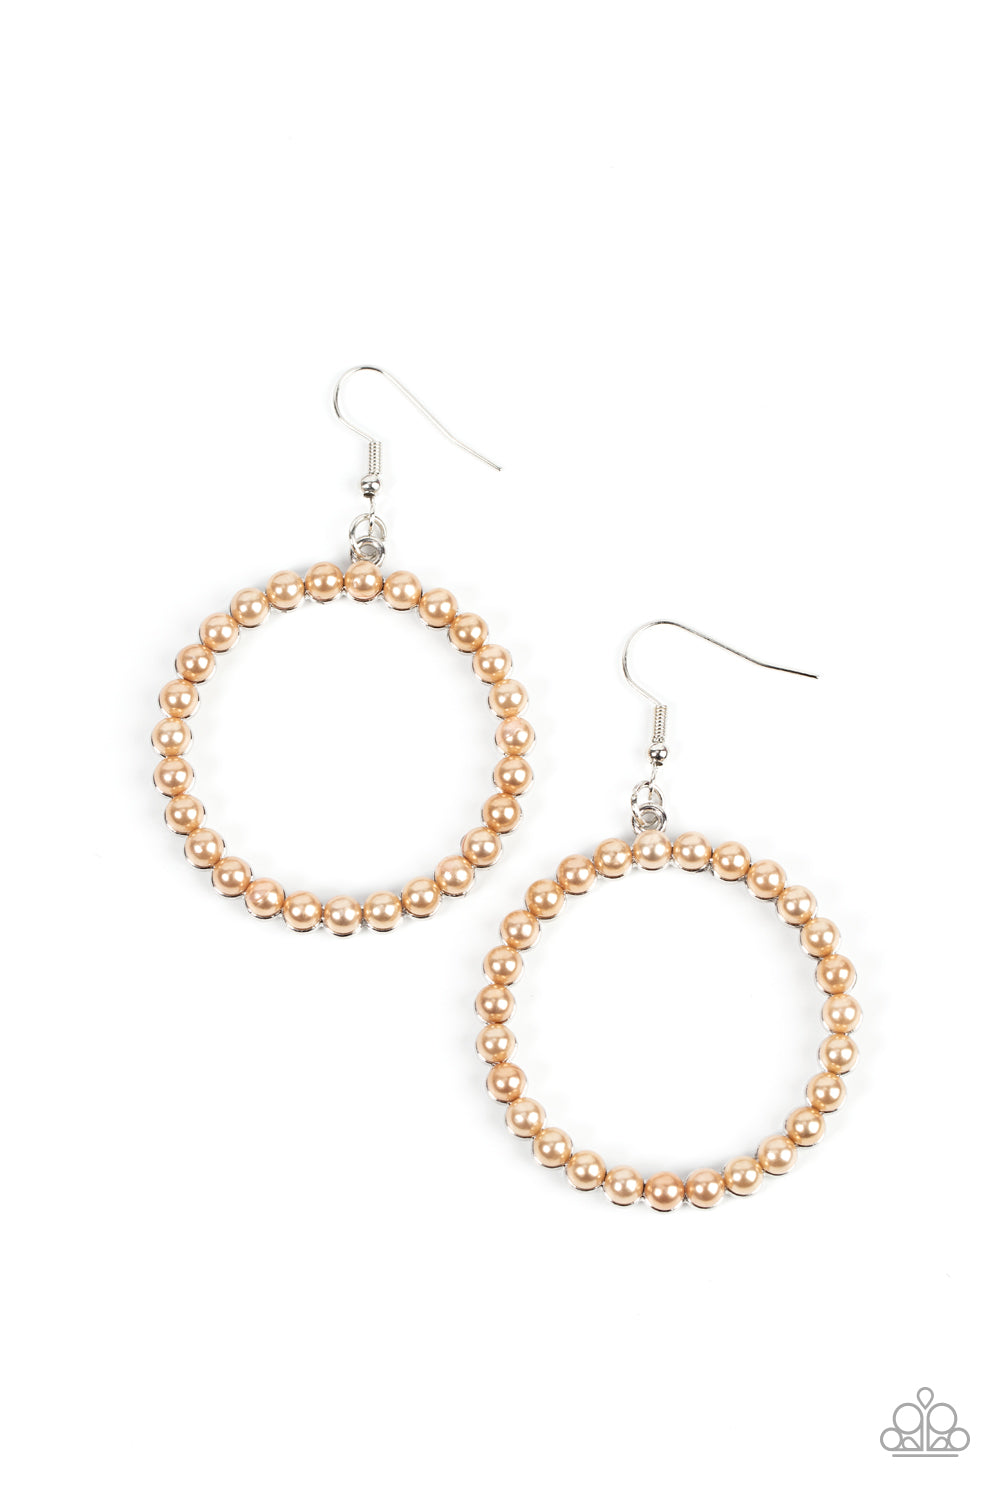 Bubbly brown pearls adorn the front of a textured silver hoop